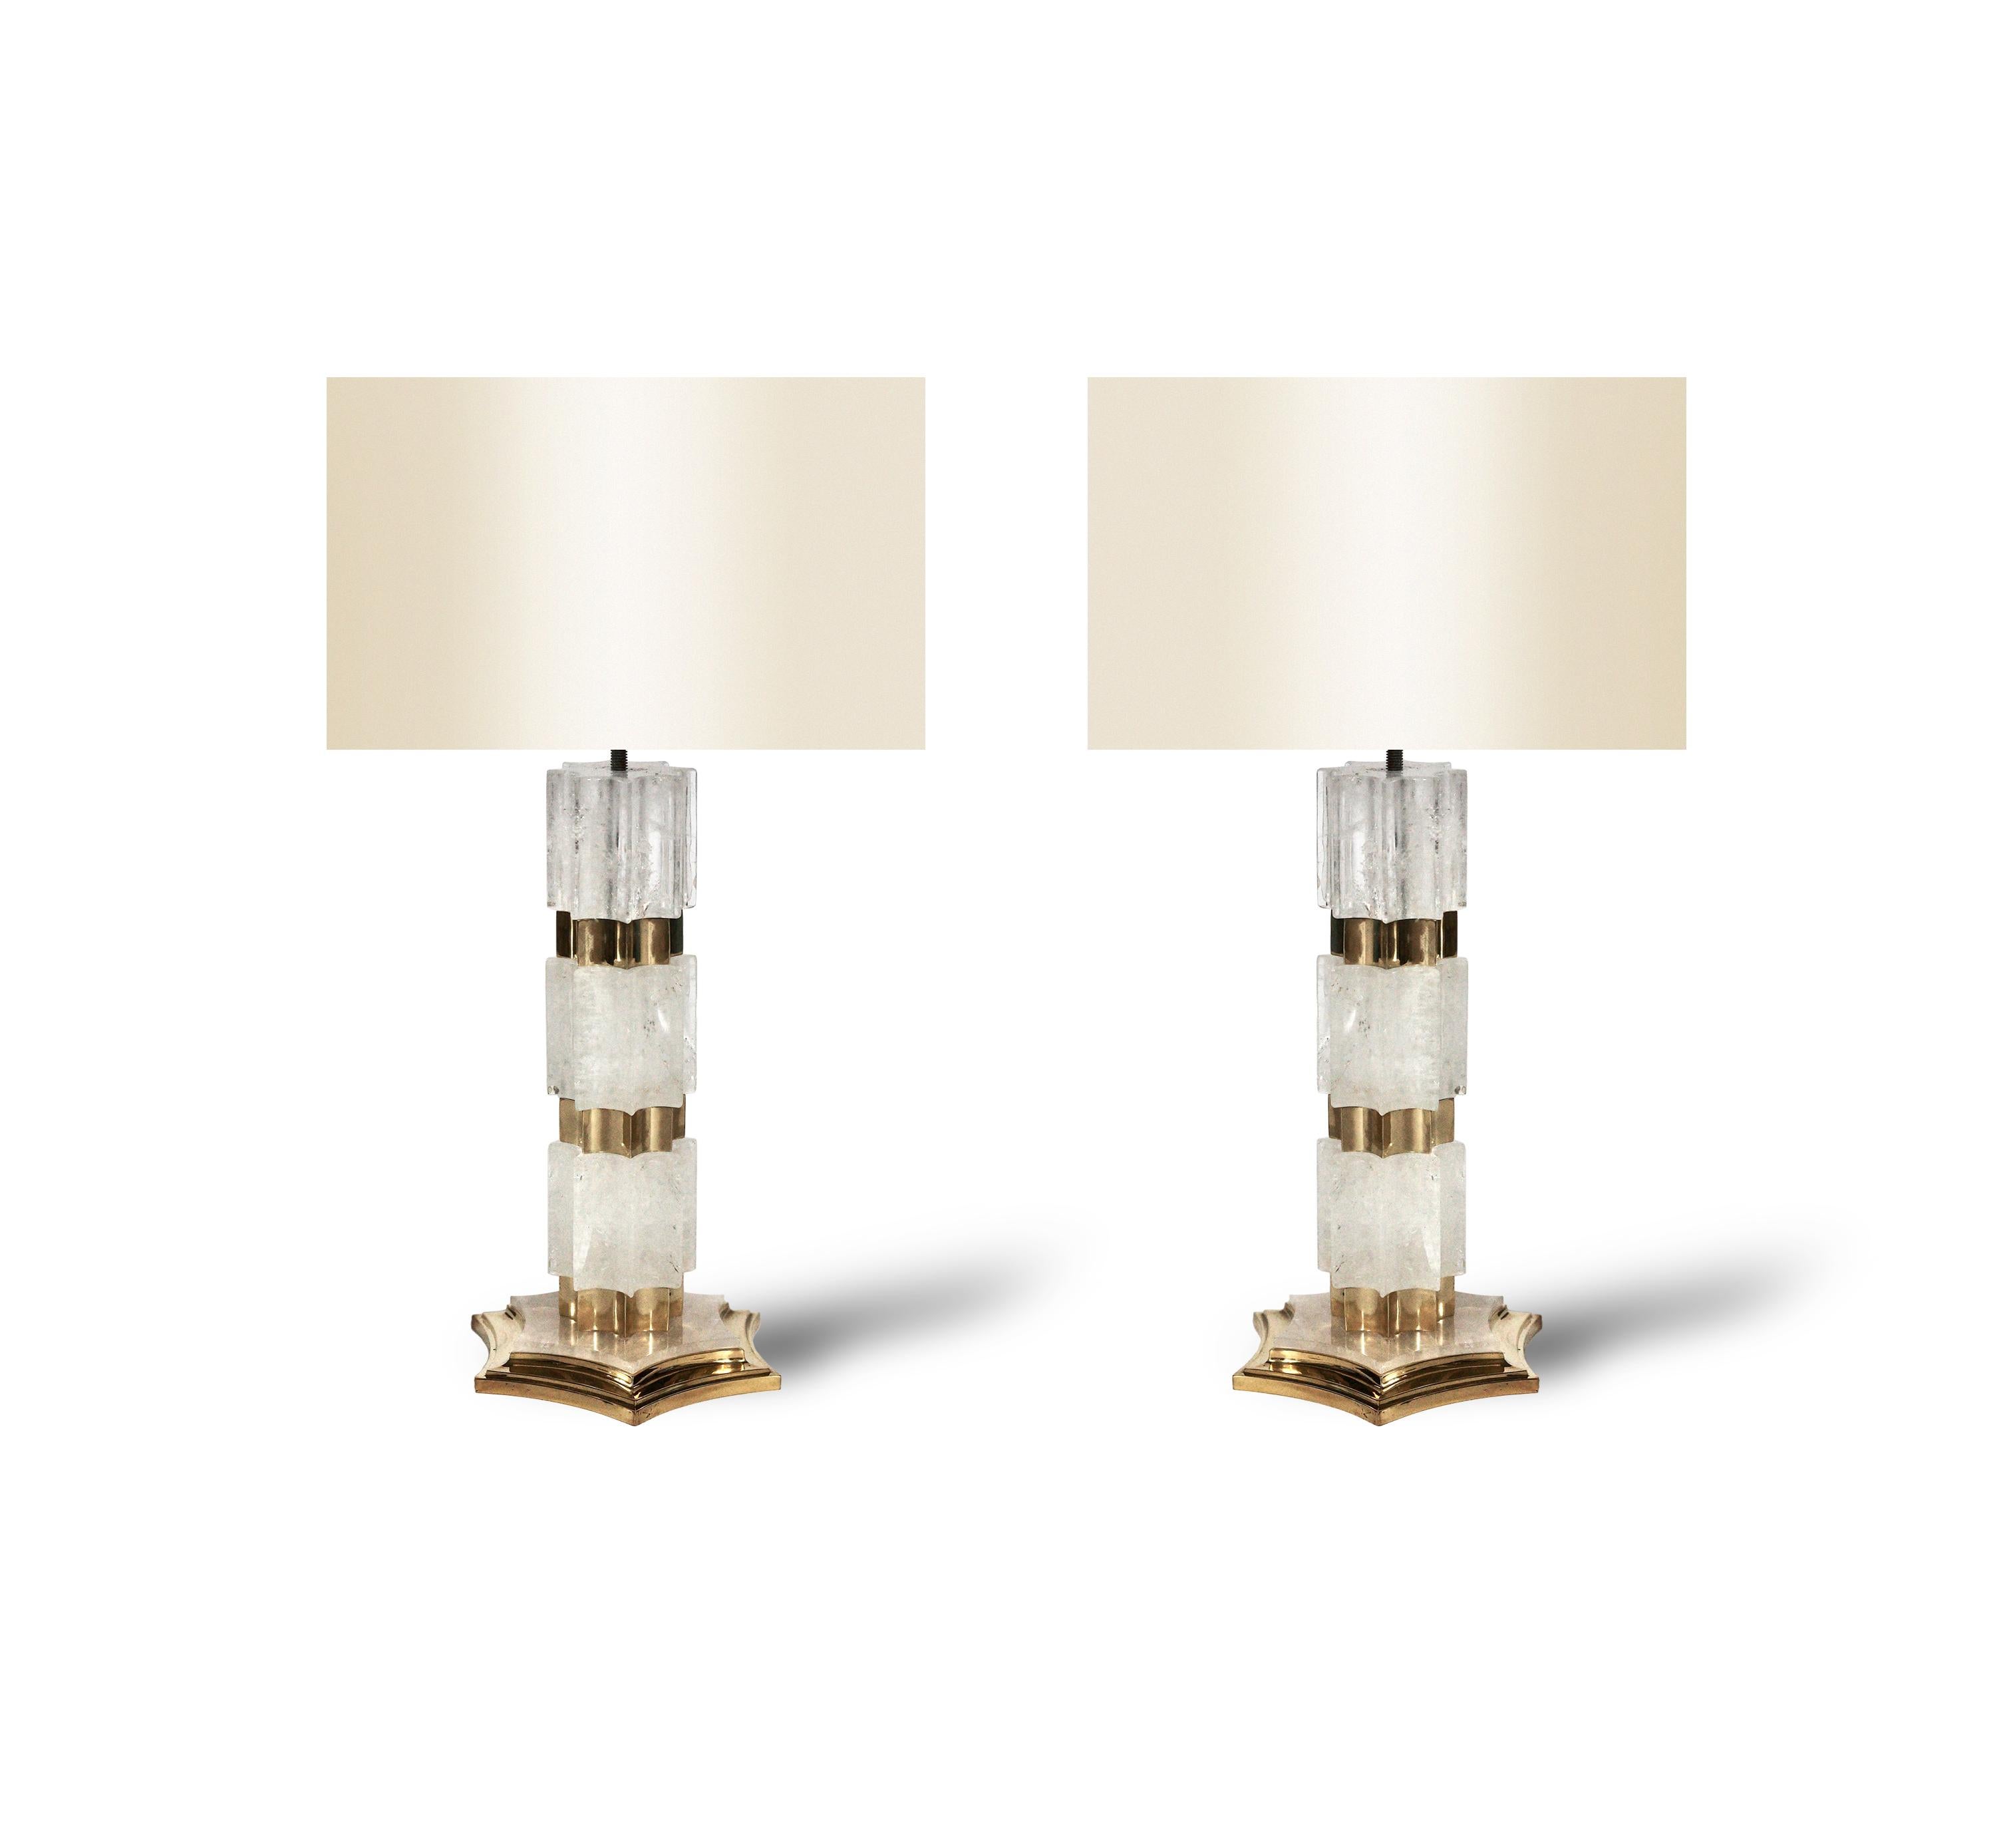 Pair of finely carved rock crystal lamps with polish brass decoration.

To the top of rock crystal 13 inch.

Created by Phoenix 

Lampshades are not included.

